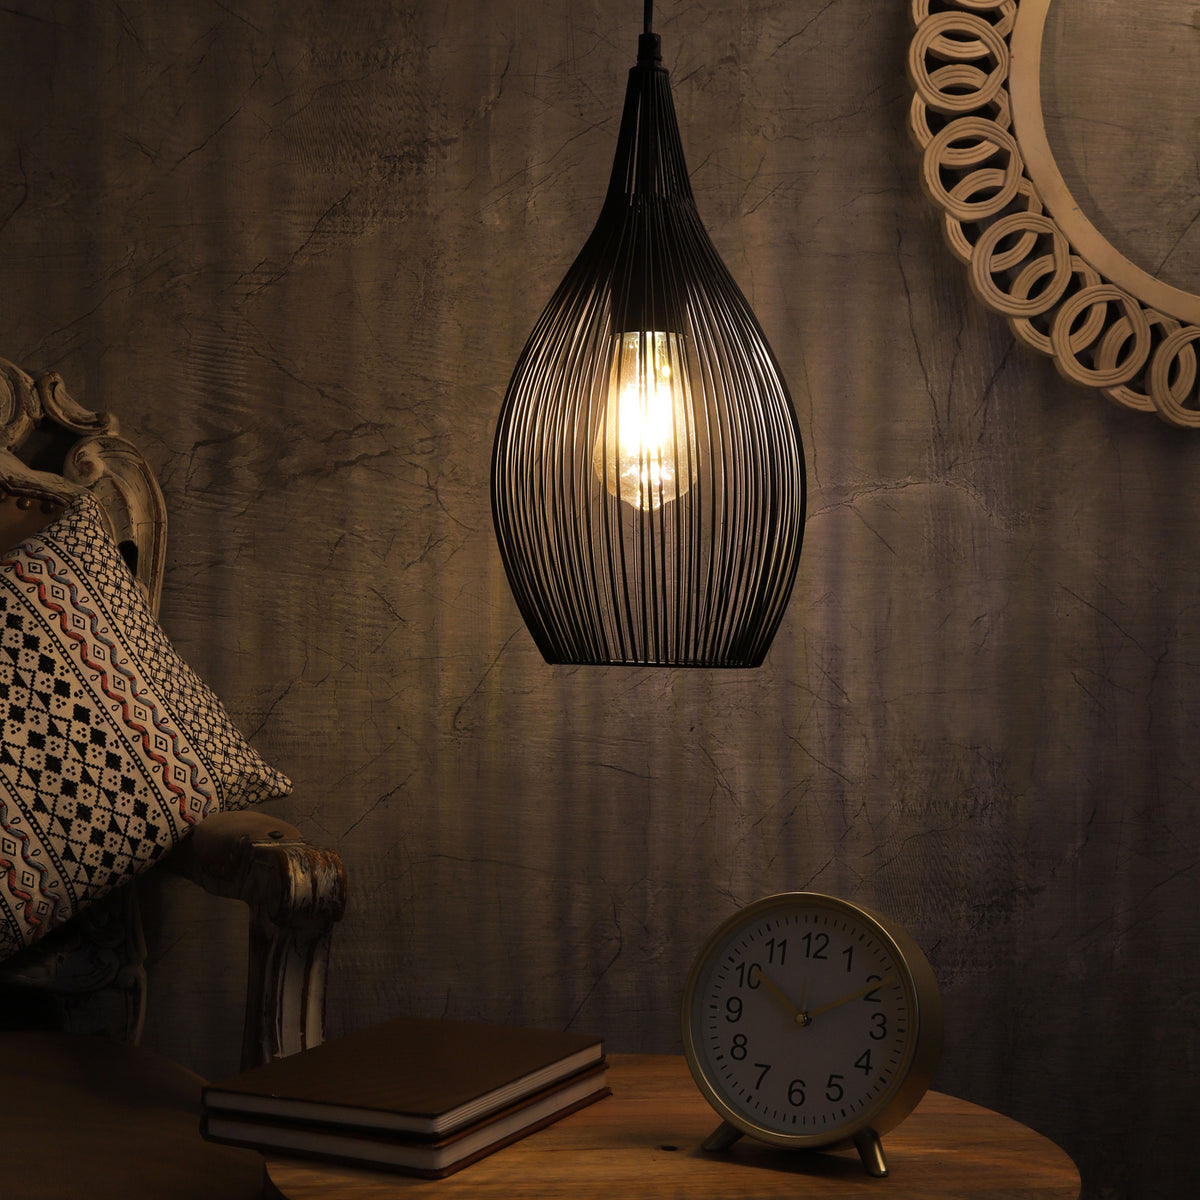 "The Wired Pendant Light" in Jet Black Finish